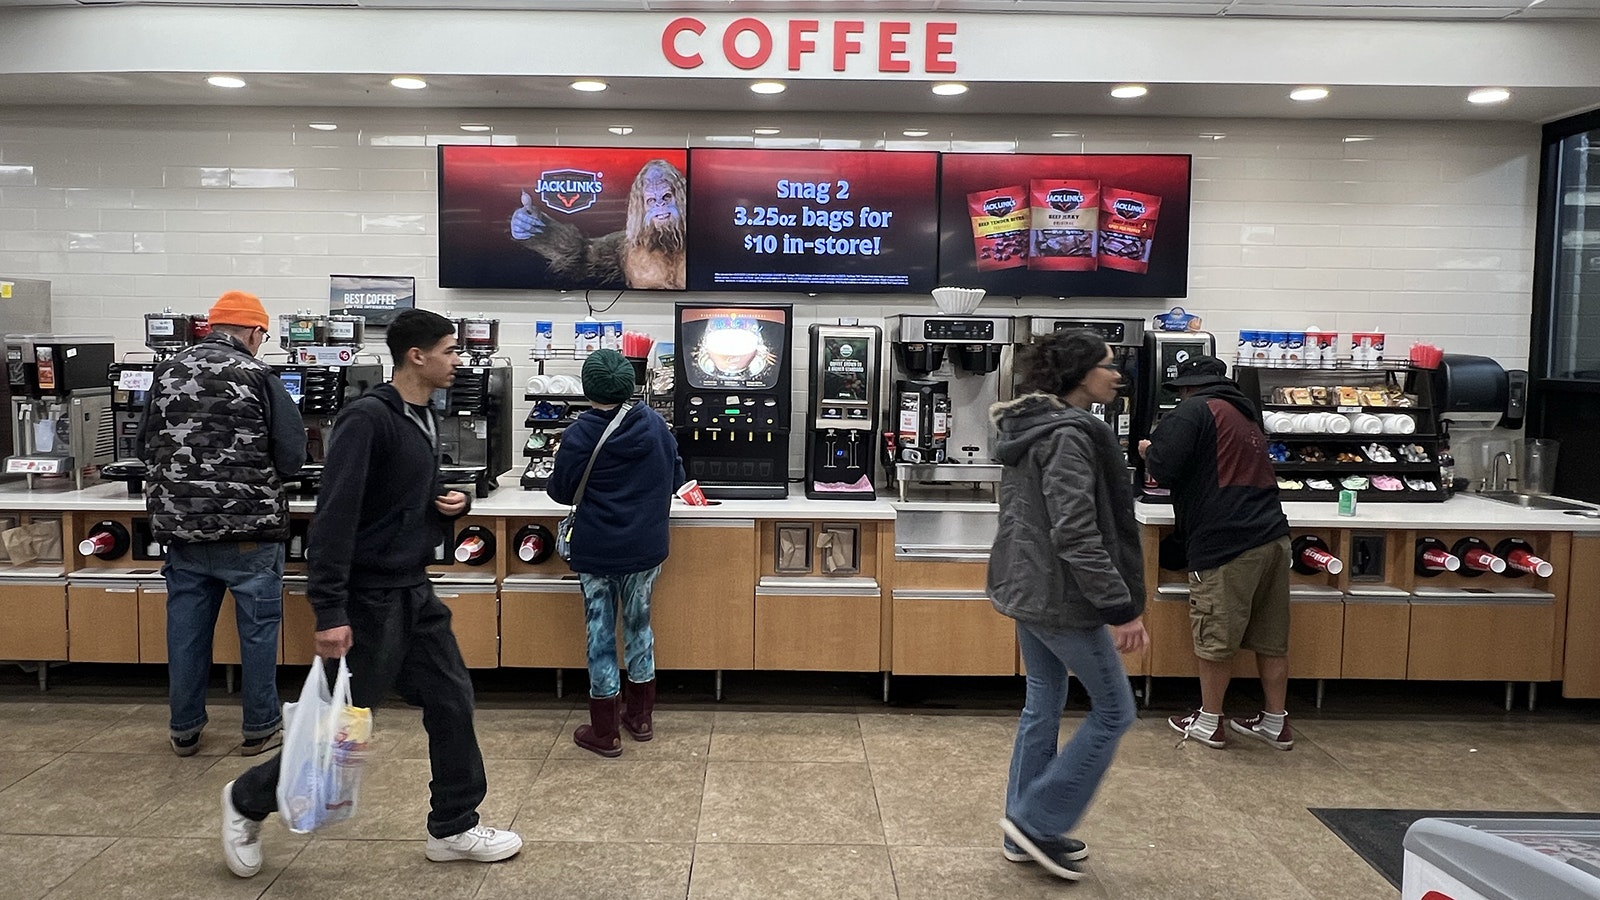 Activity around the coffee counter at the Pilot Flying J truck stop in Cheyenne off Interstate 25 picks up at about 6 a.m.